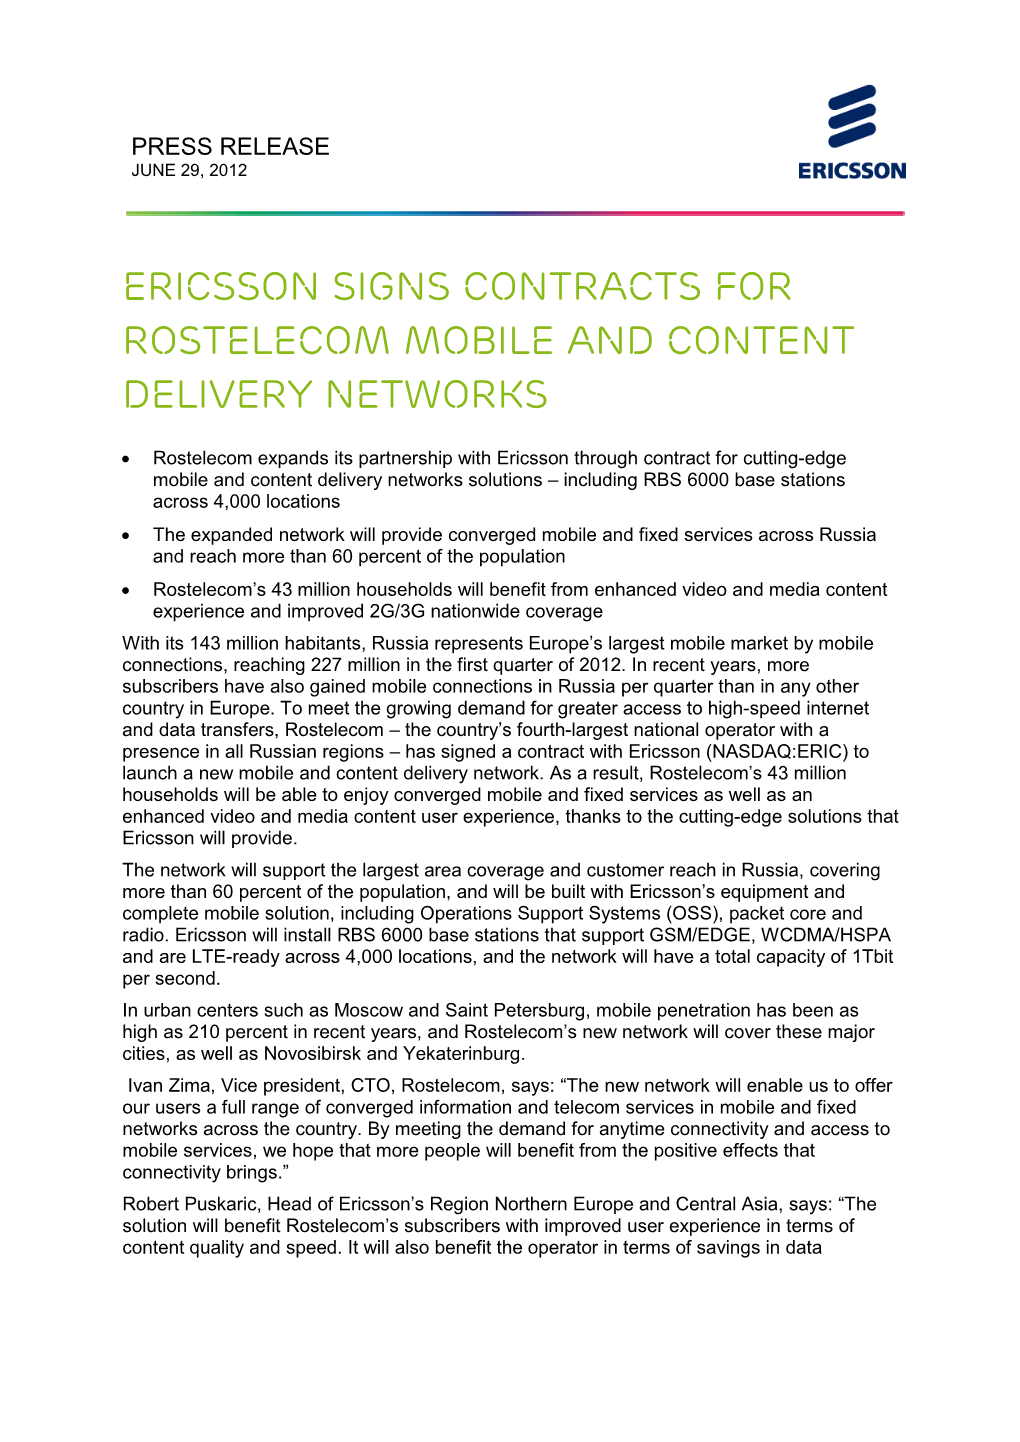 Ericsson Signs Contracts for Rostelecom Mobile and Content Delivery Networks